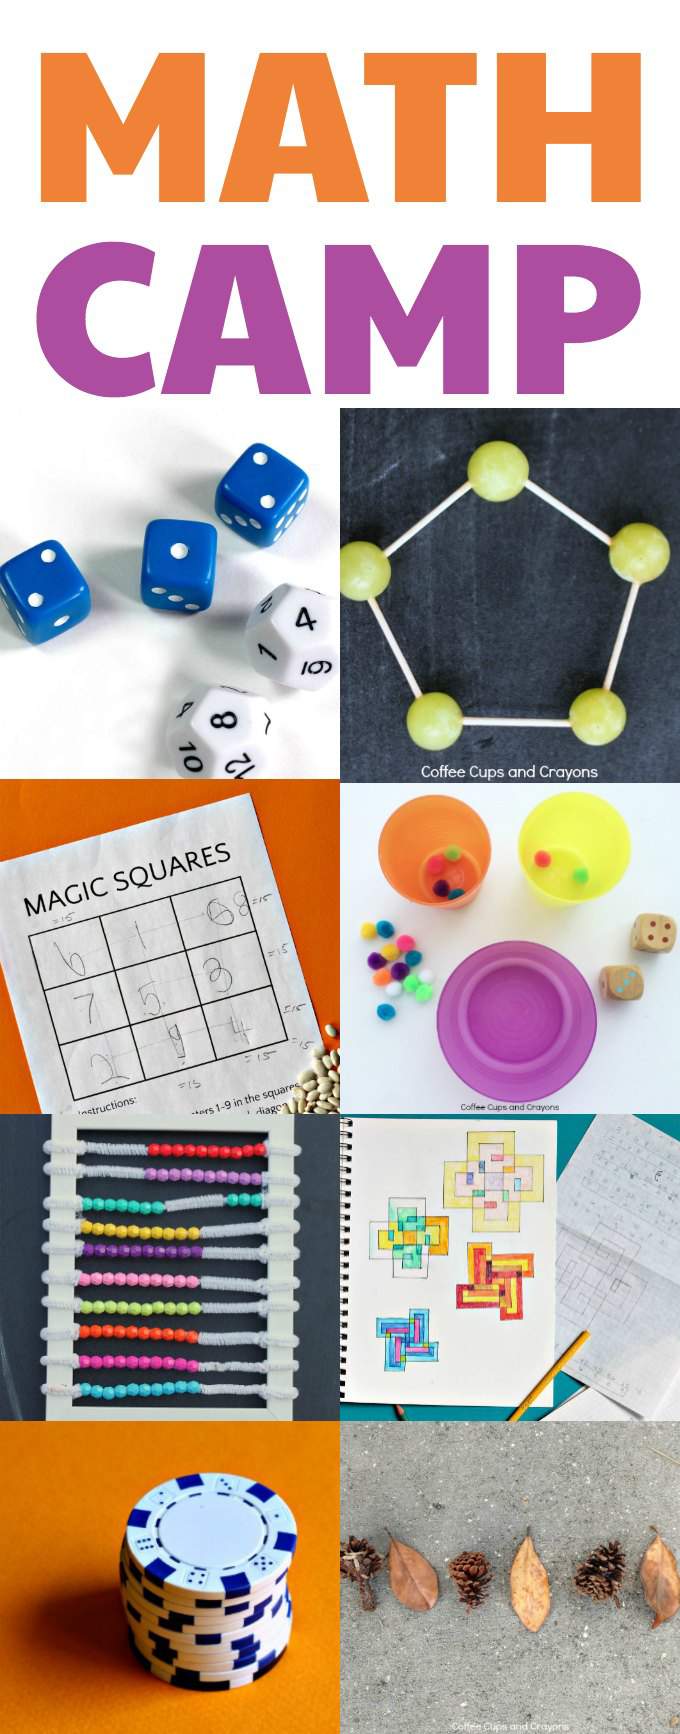 Do it yourself Math camp at home for kids.